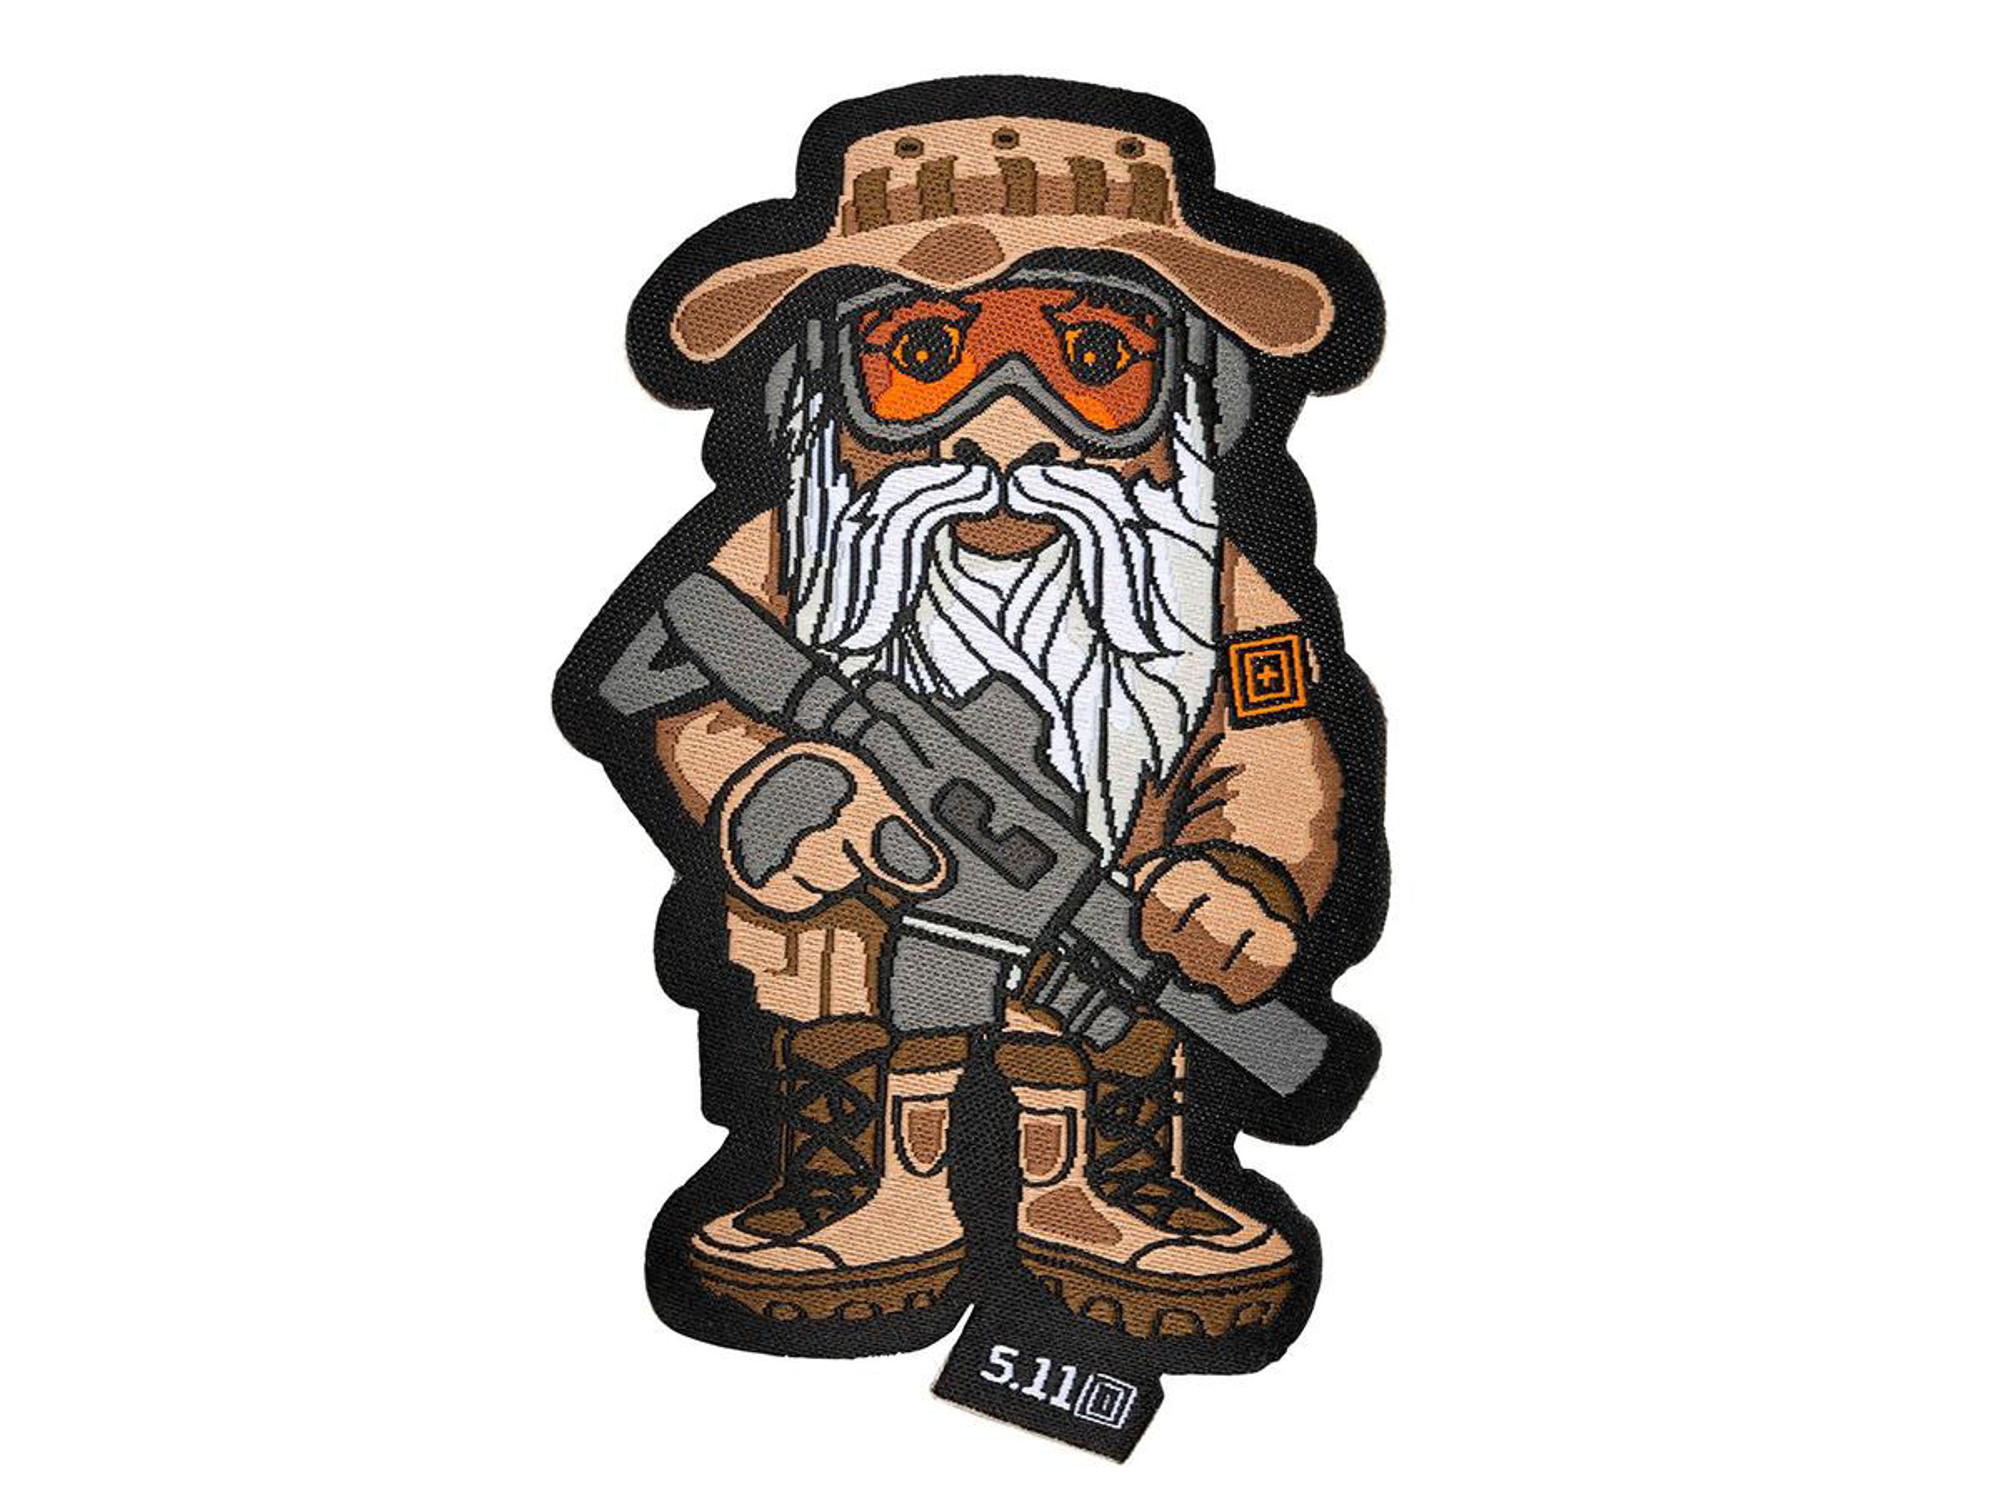 5.11 Tactical "Marine Recon Gnome" Embroidered Hook and Loop Morale Patch